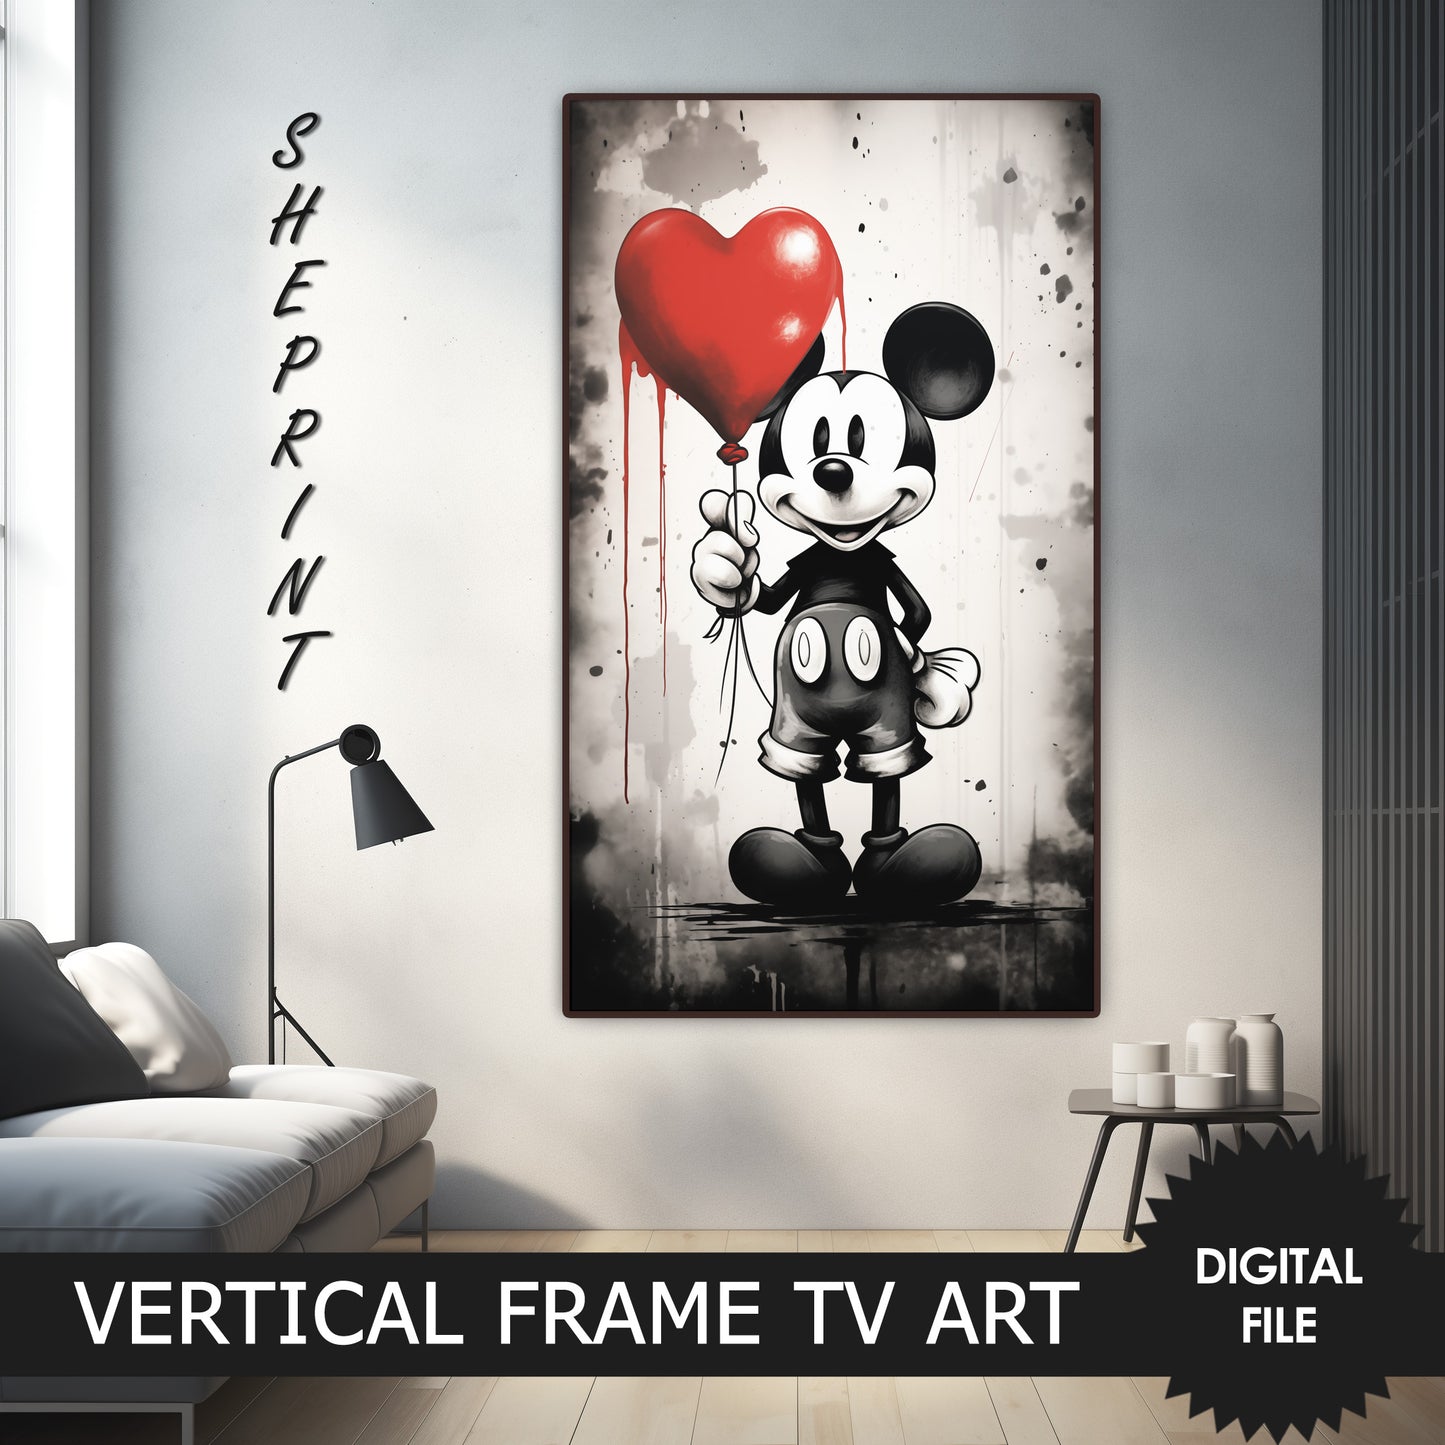 Vertical Frame TV Art, Happy Valentines Day, First Version Of Mickey Holding Red Heart Balloon, preview on Samsung Frame TV when mounted vertically